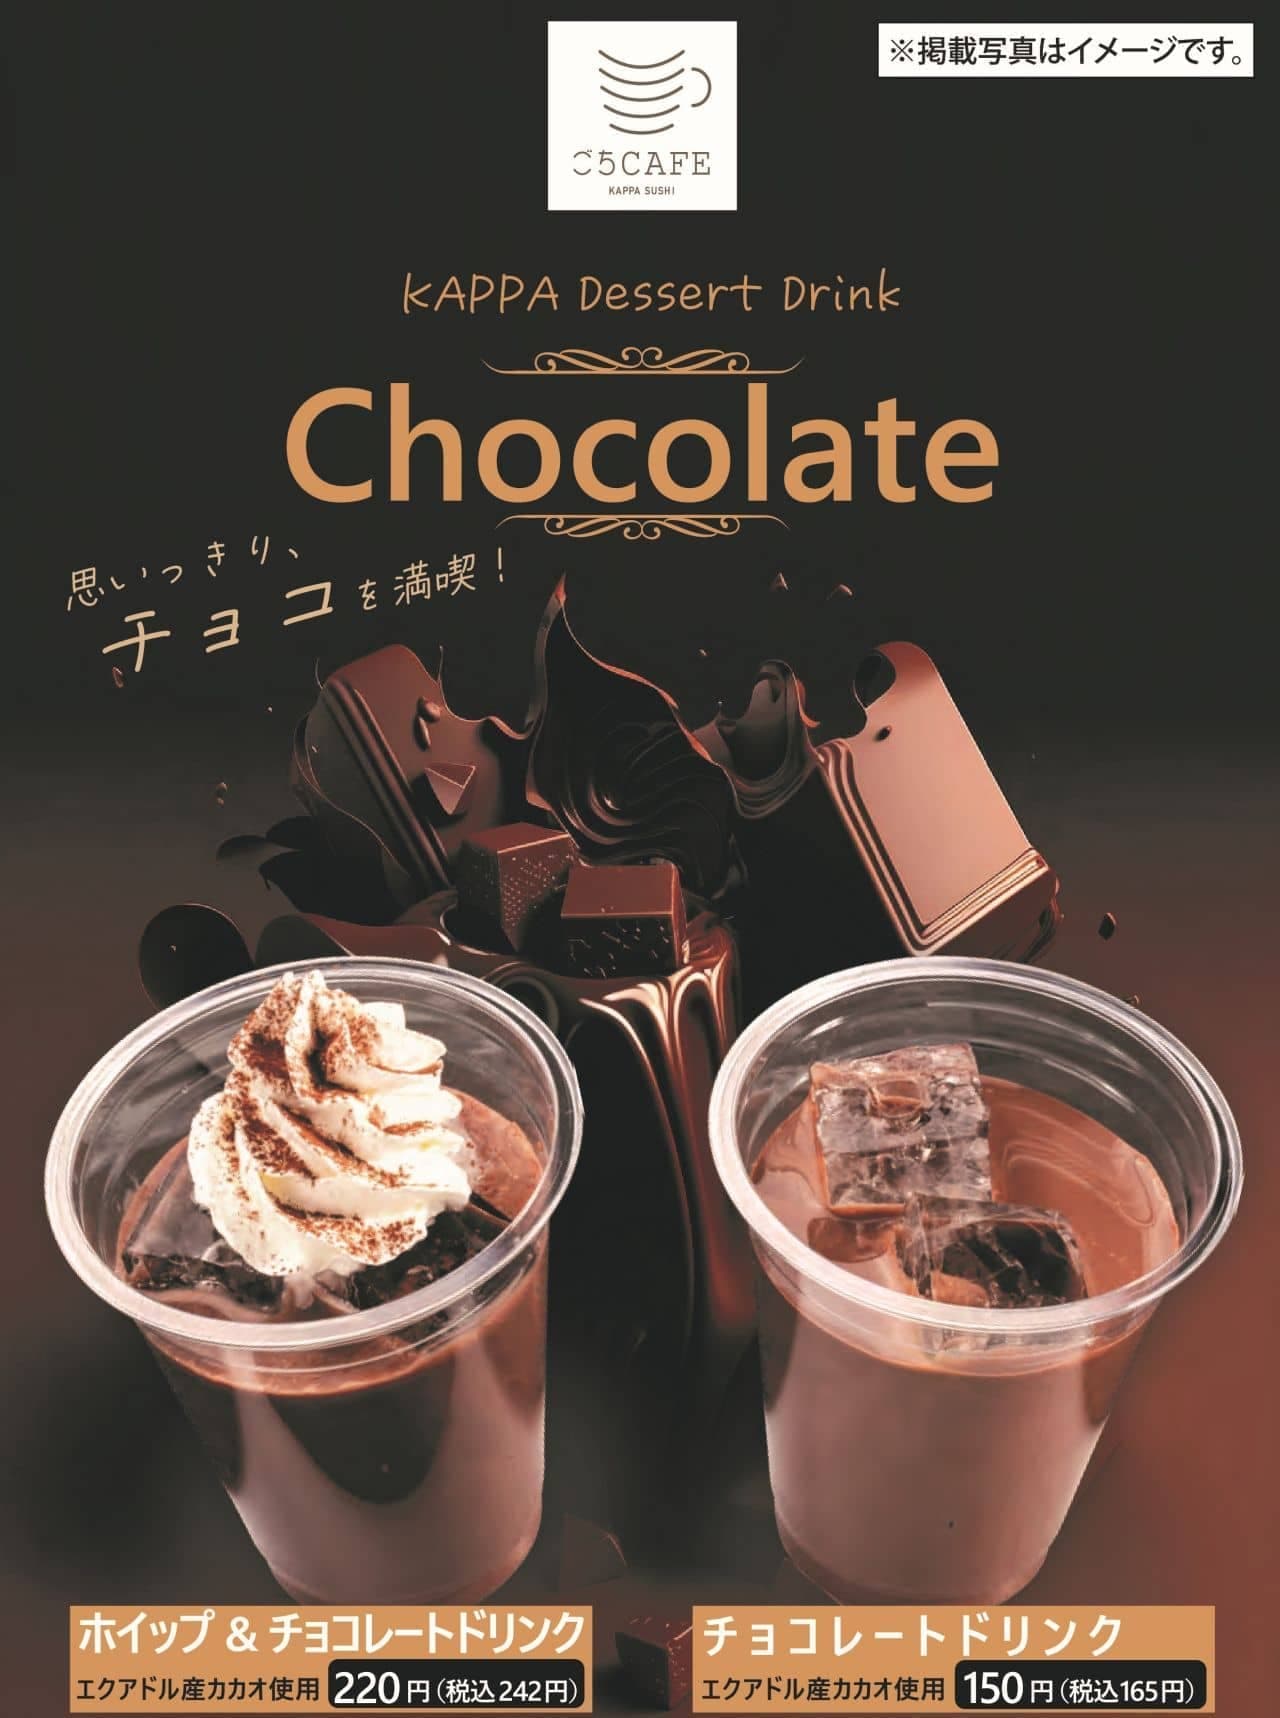 Kappa Sushi "Chocolate Drink" and "Whipped & Chocolate Drink